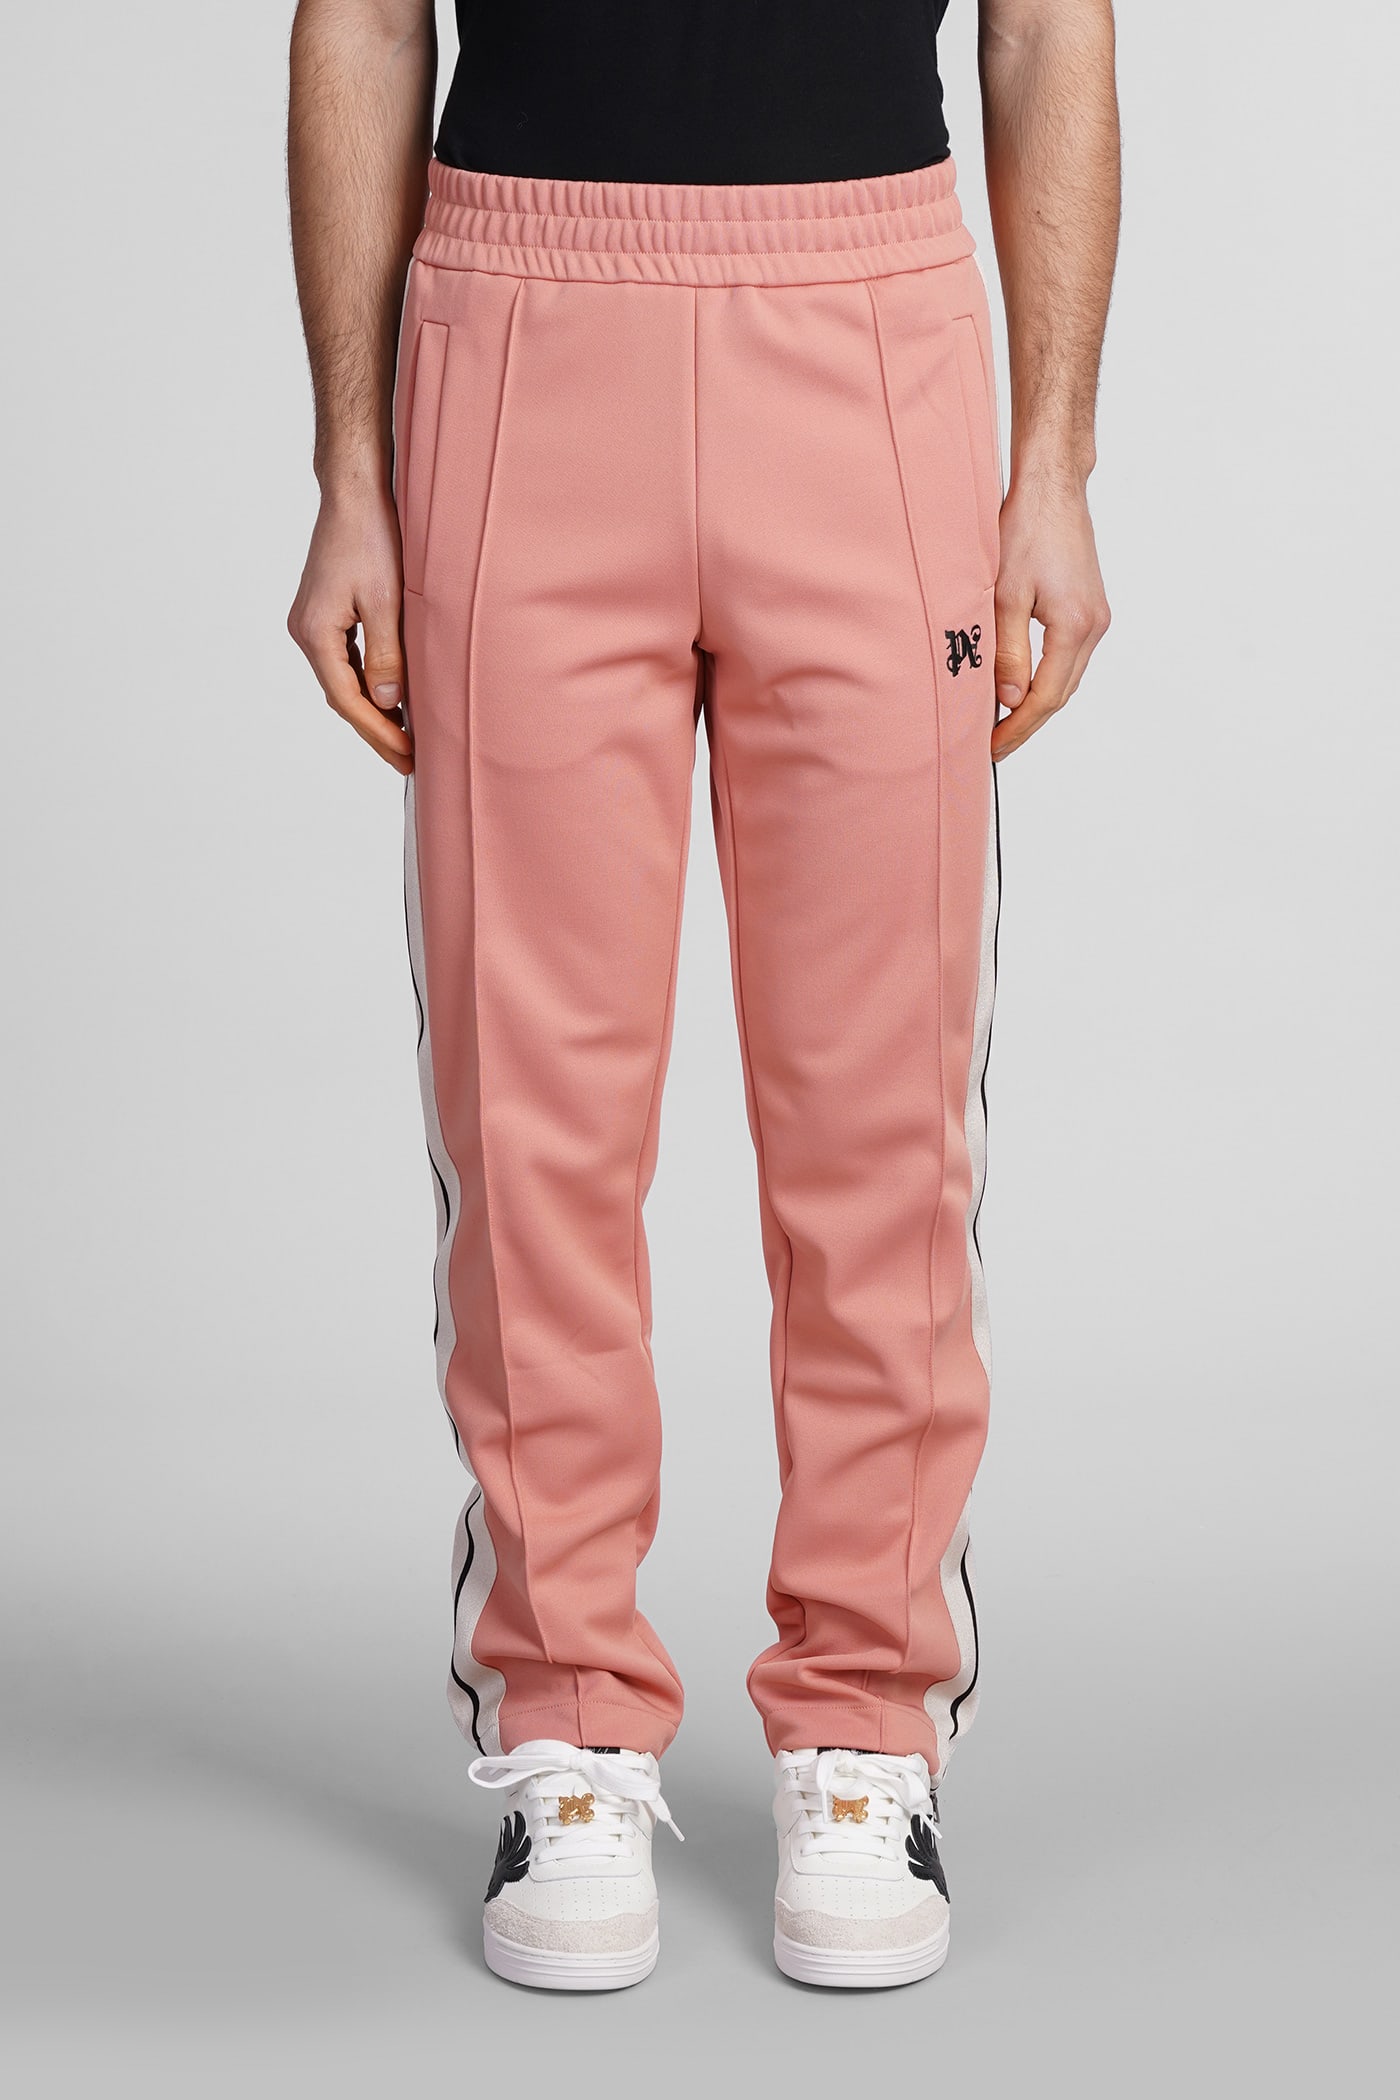 Palm Angels Pants In Rose-pink Polyester